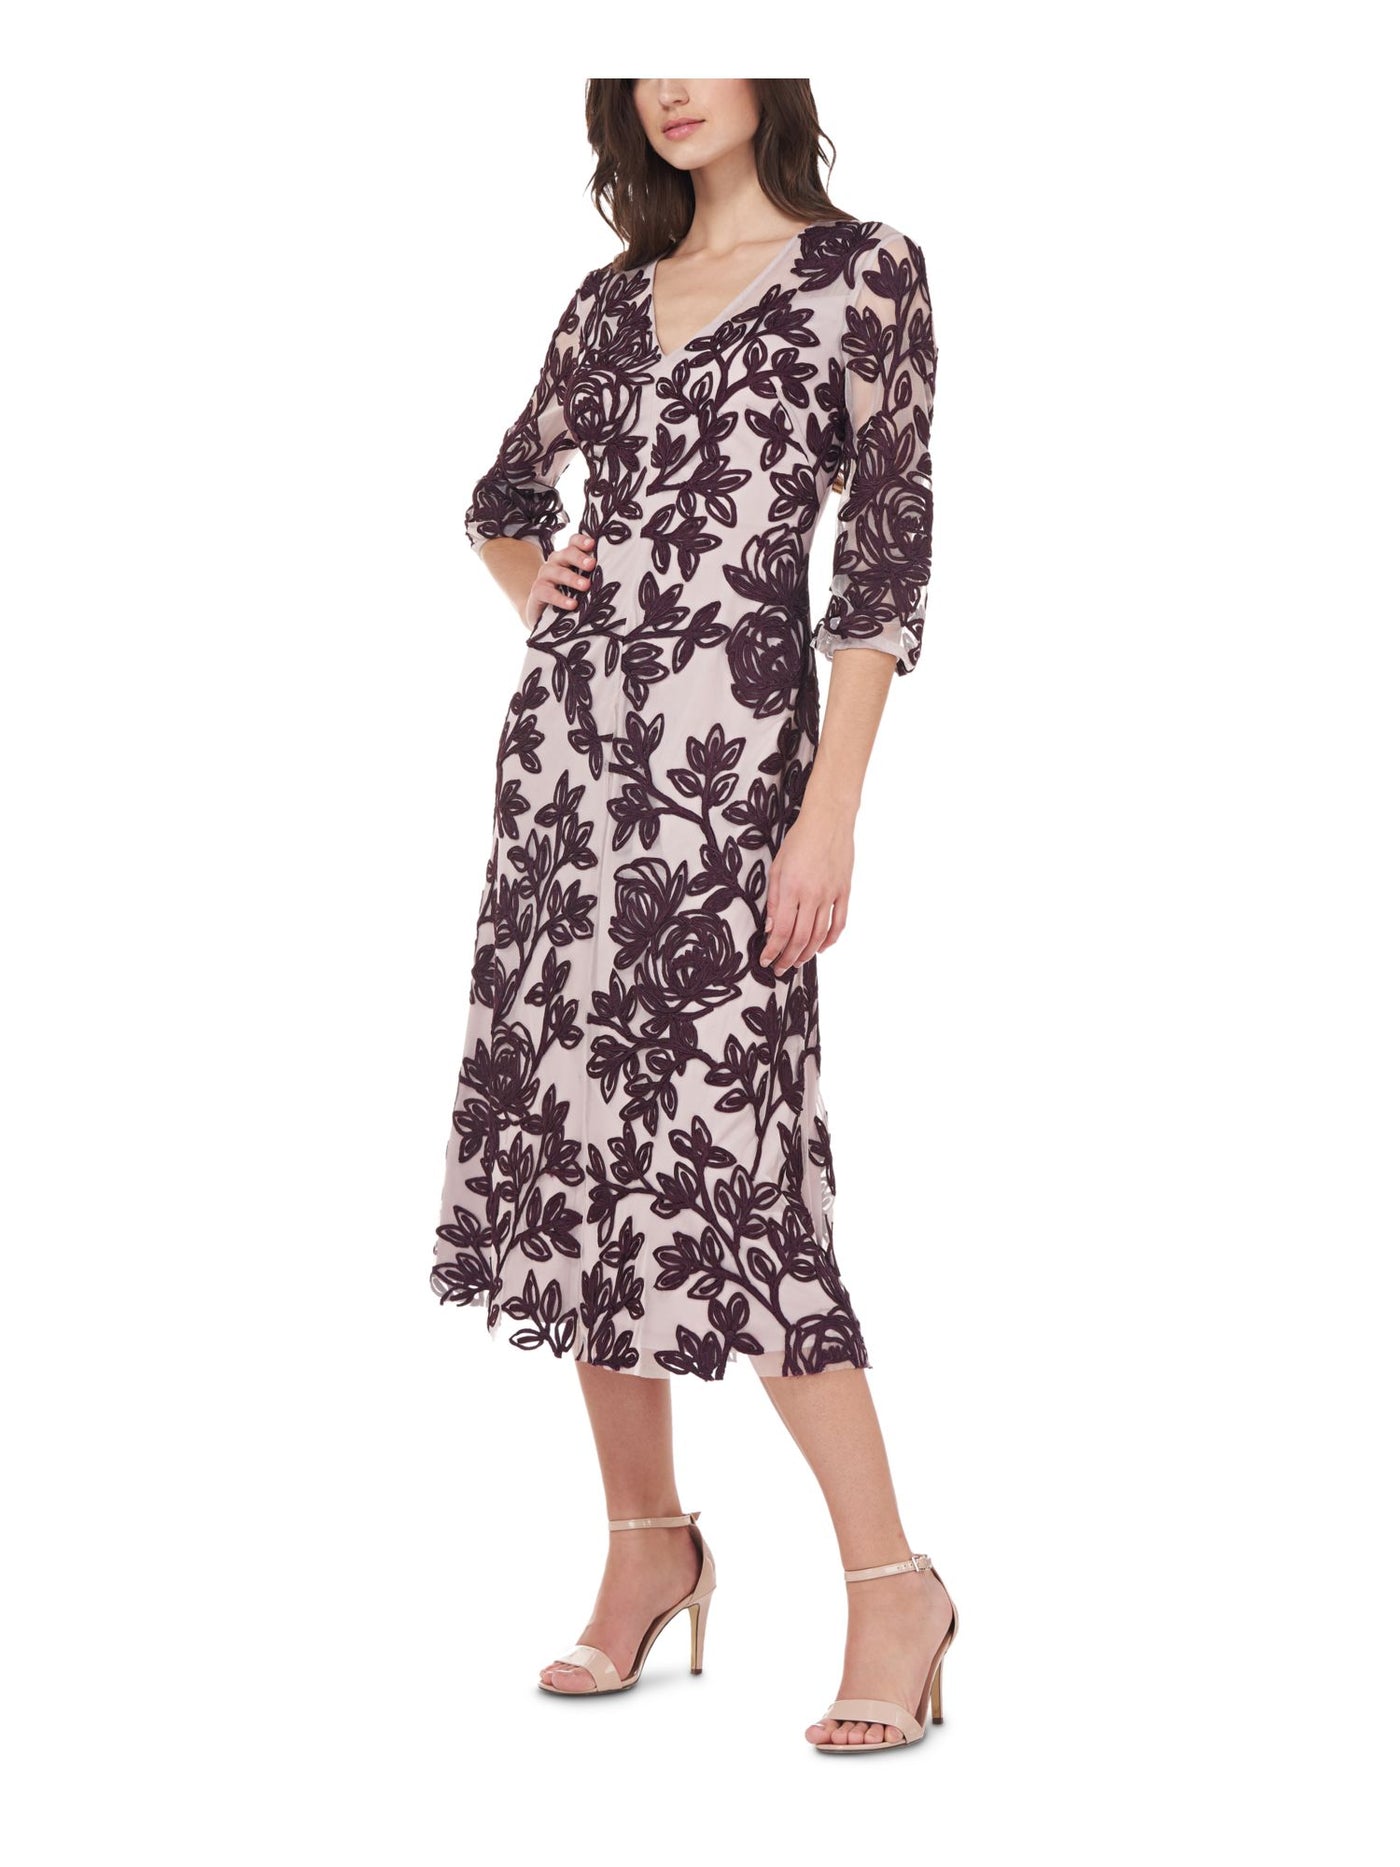 JS COLLECTION Womens Purple Zippered Lined Floral 3/4 Sleeve V Neck Tea-Length A-Line Dress 0